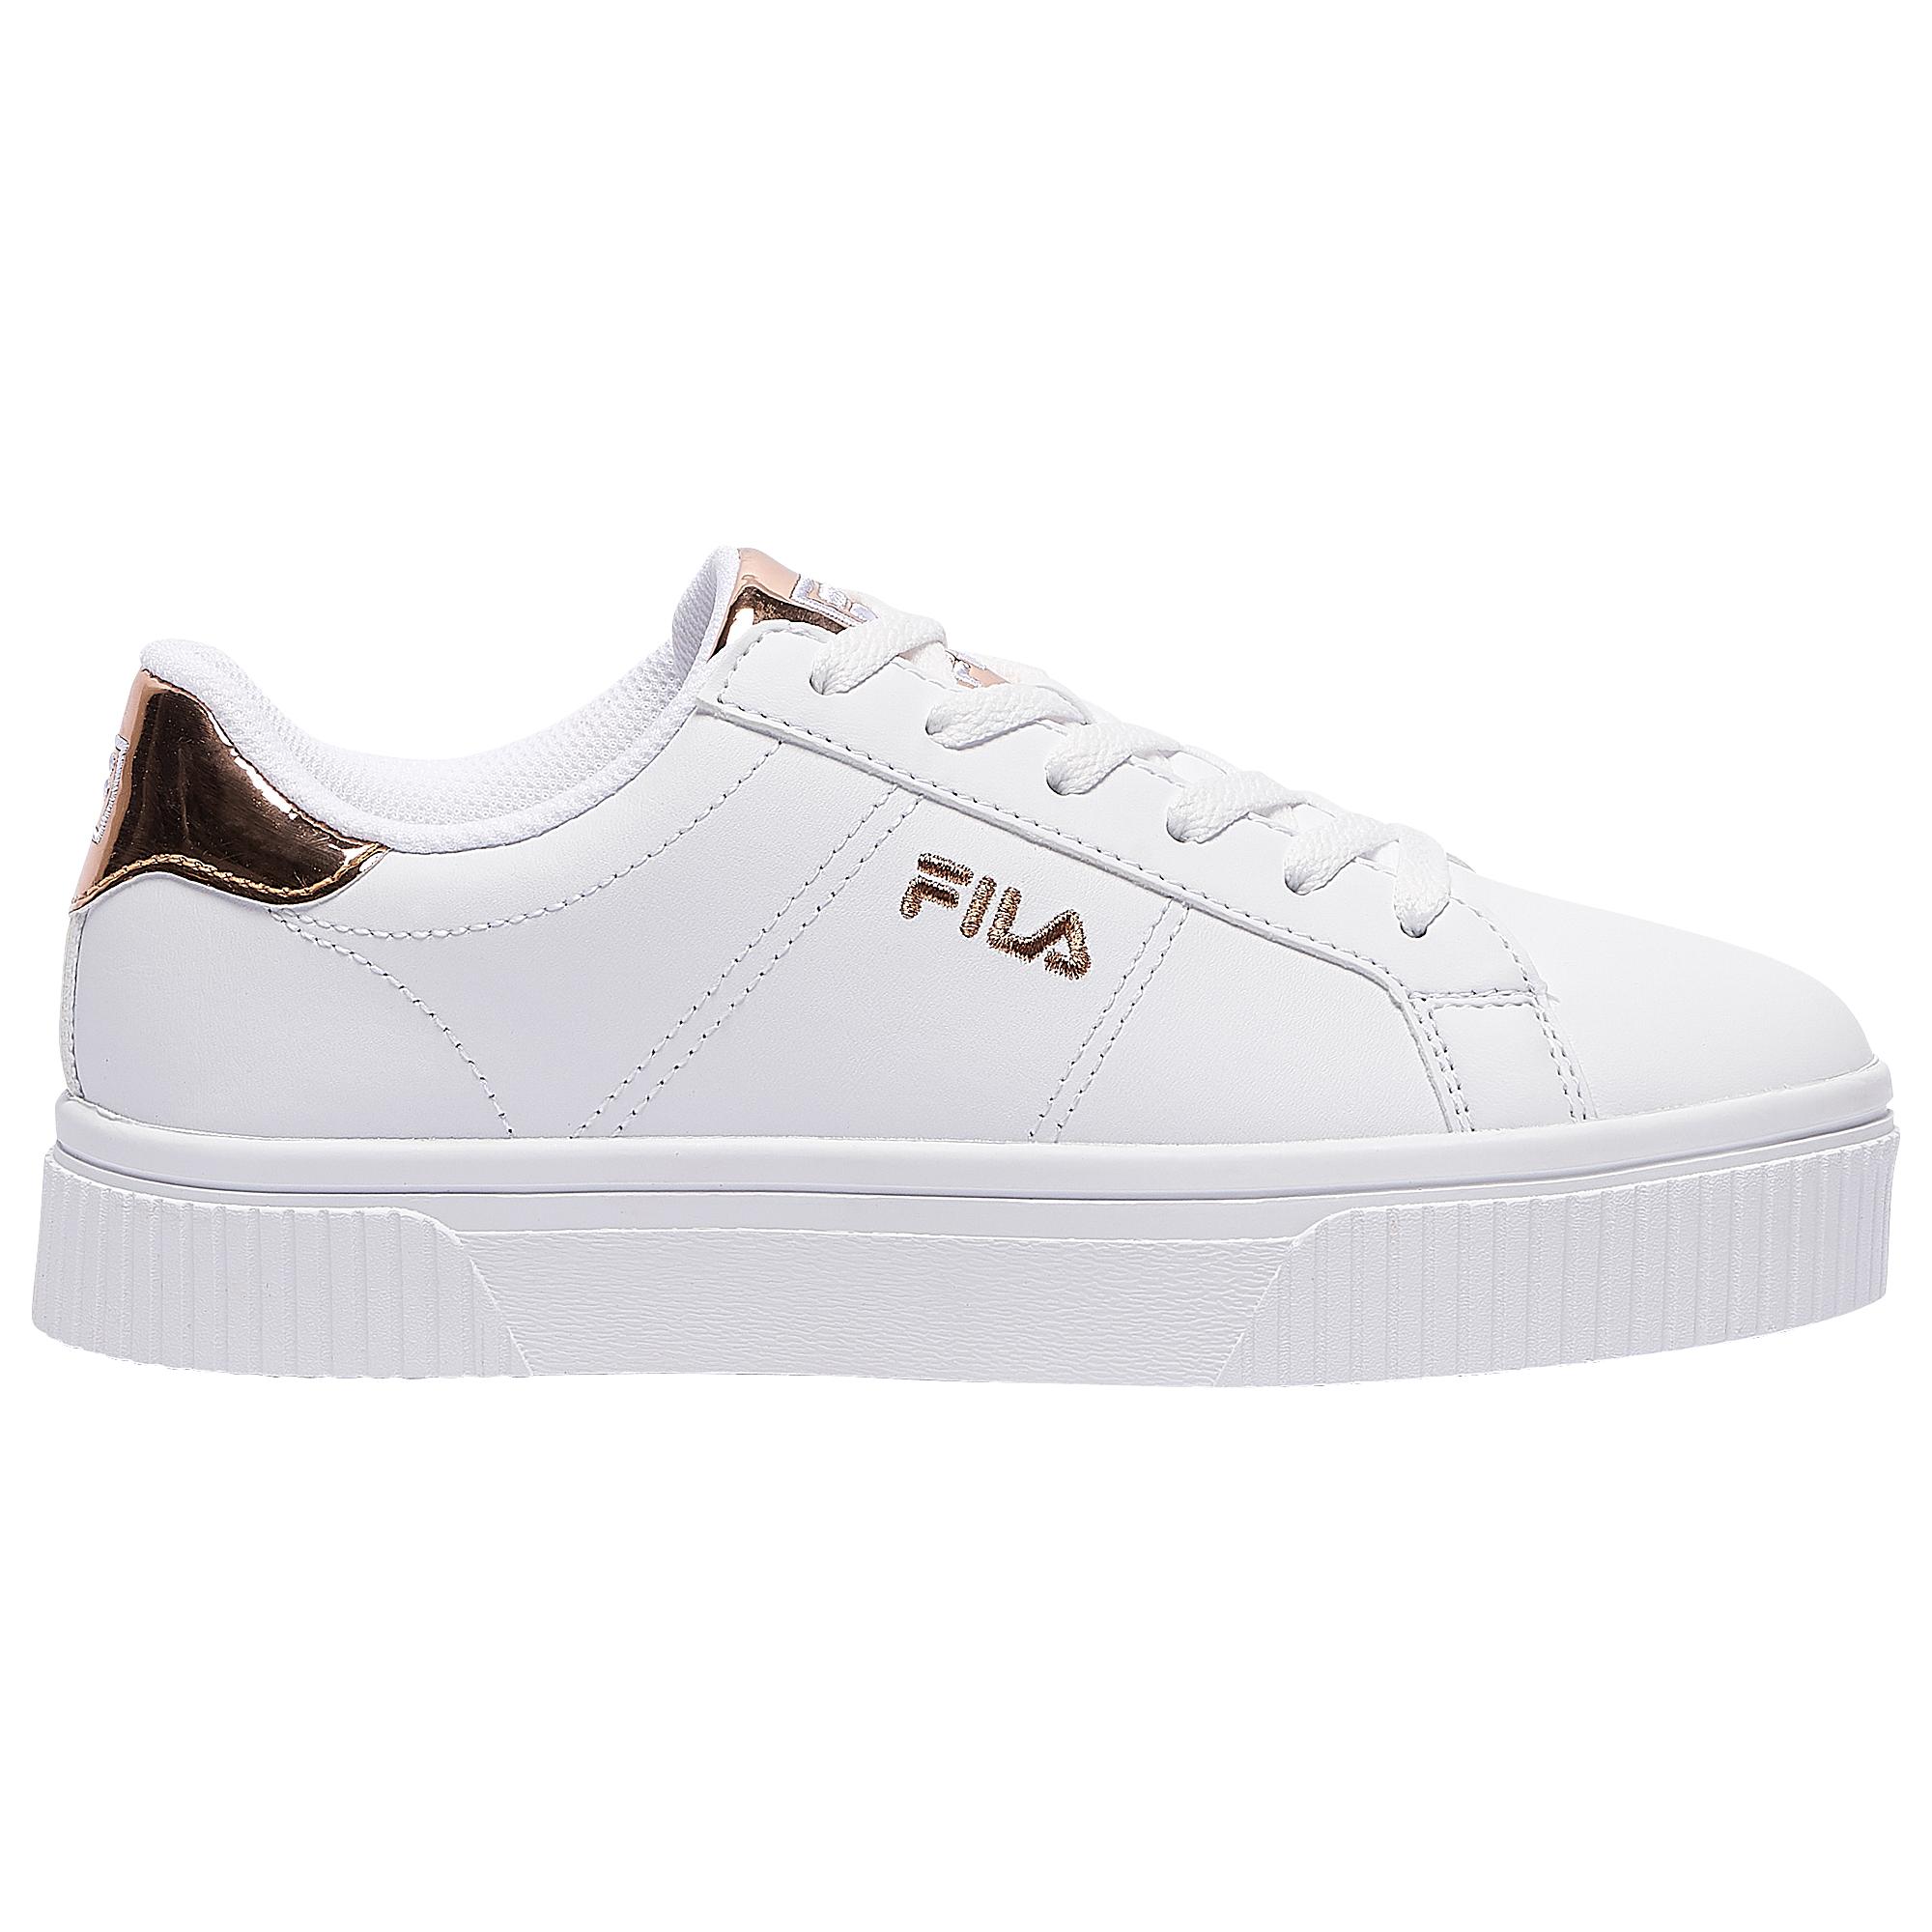 fila shoes black and gold